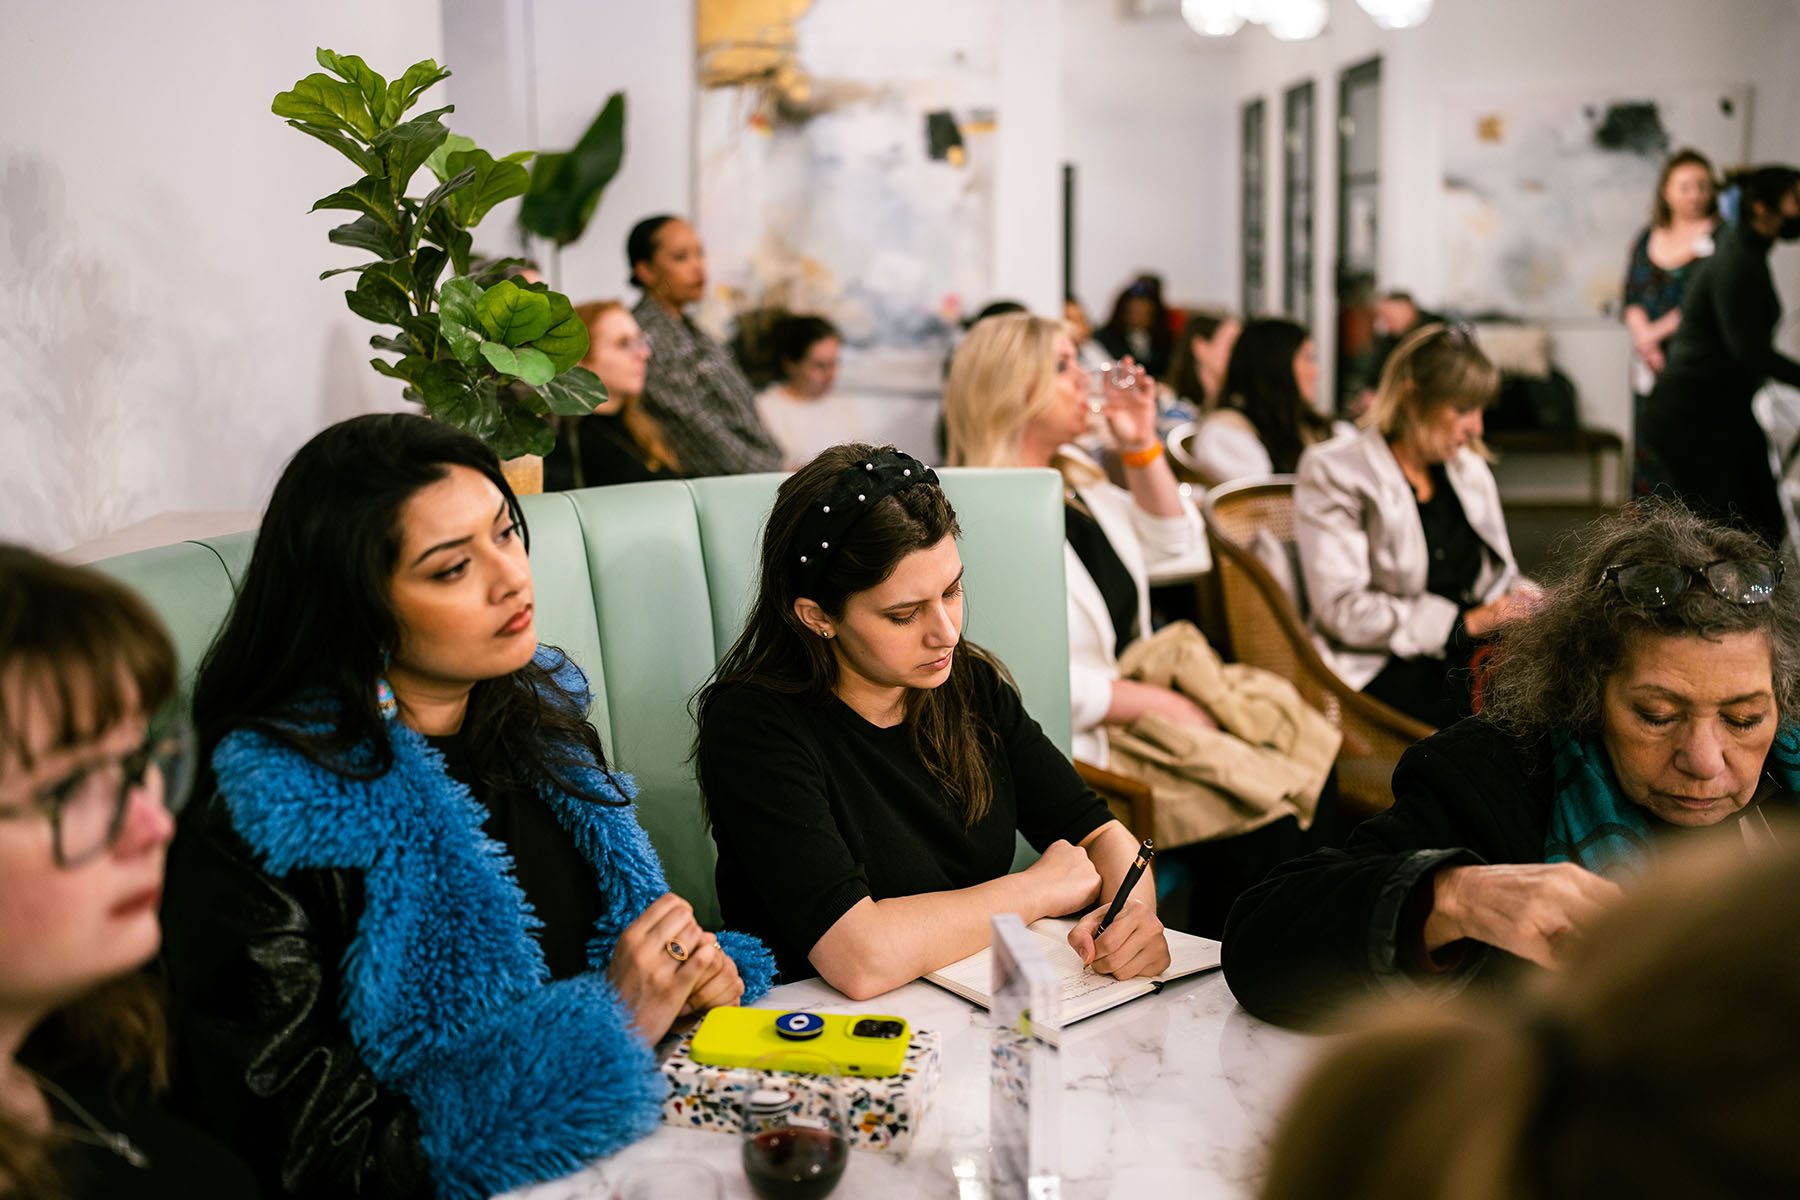 Attendees listen at "The 19th Celebrates: International Women's Day" event at The Luminary in New York City on March 7, 2023.